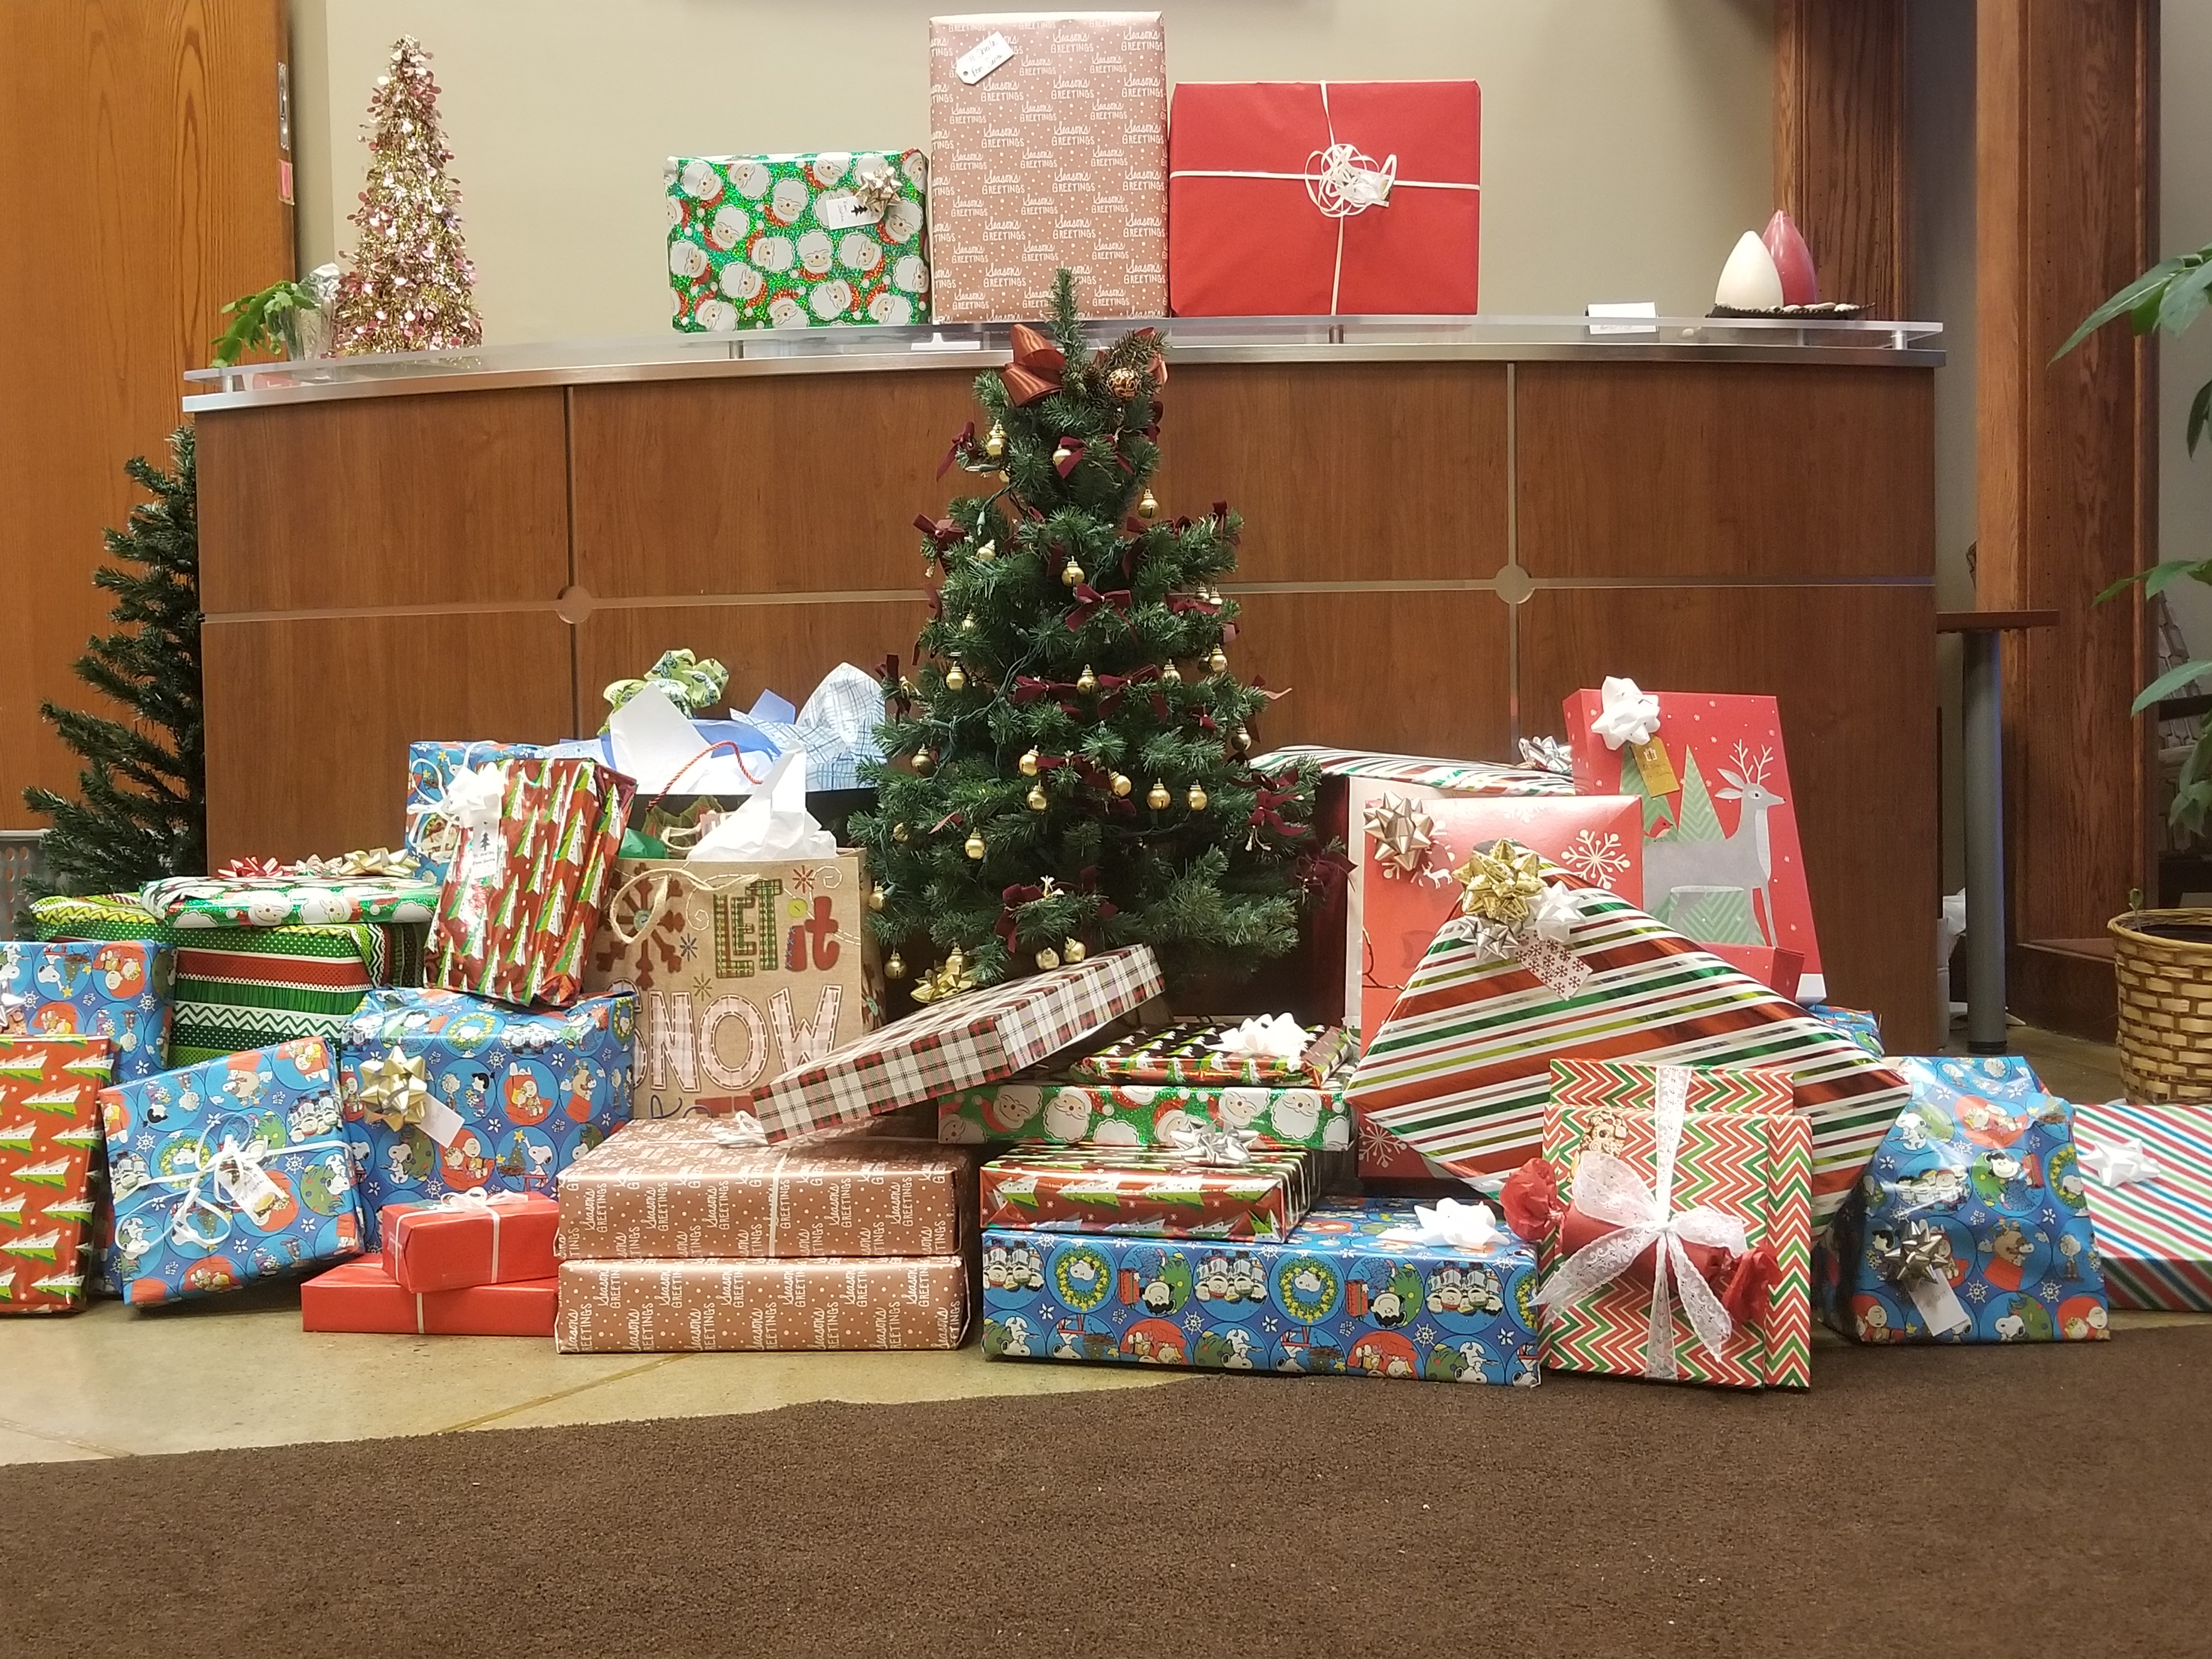 ECRM collected $320 and 56 presents for a family of five this past holiday season.